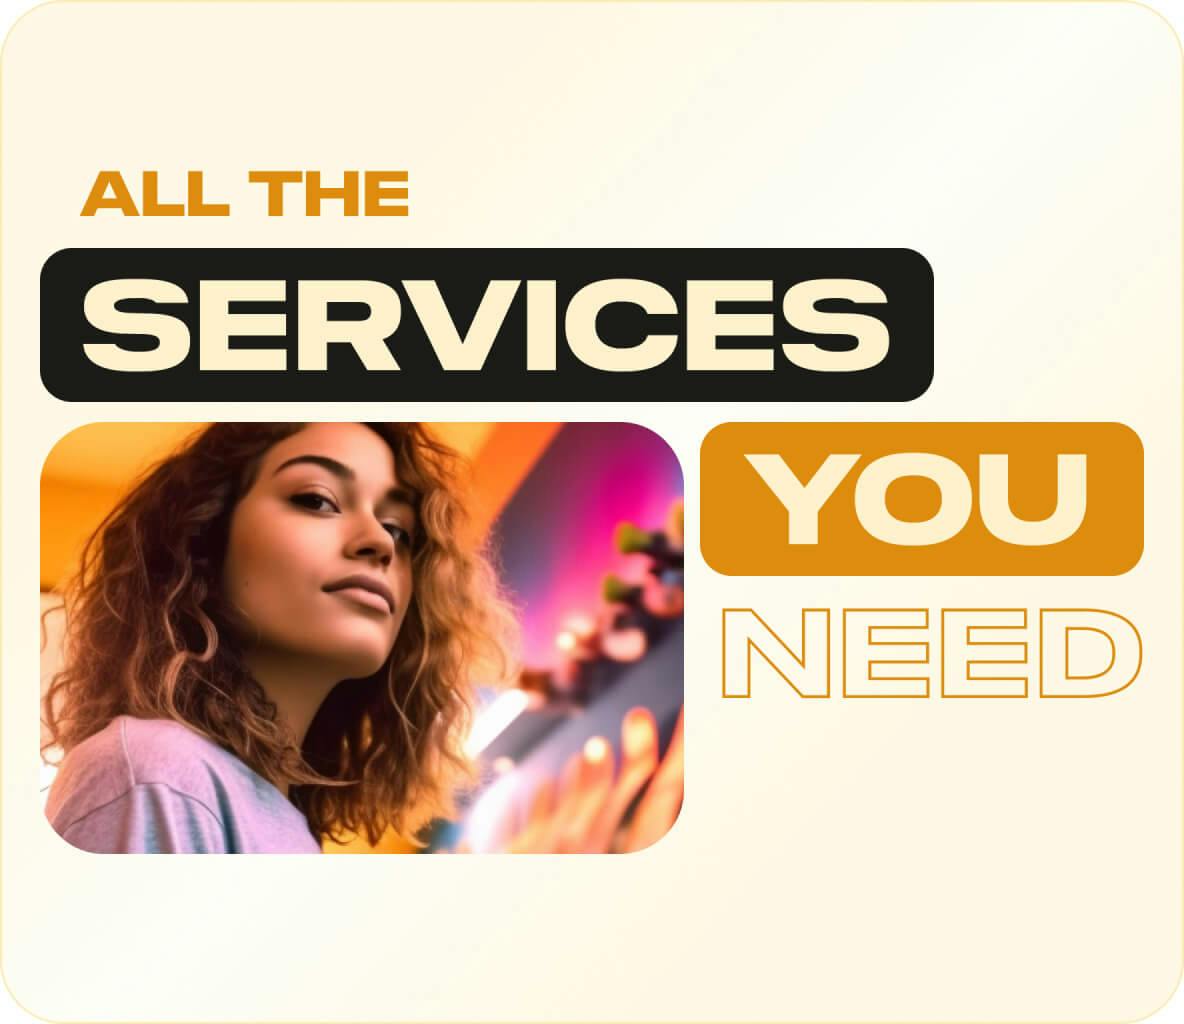 All the services you need